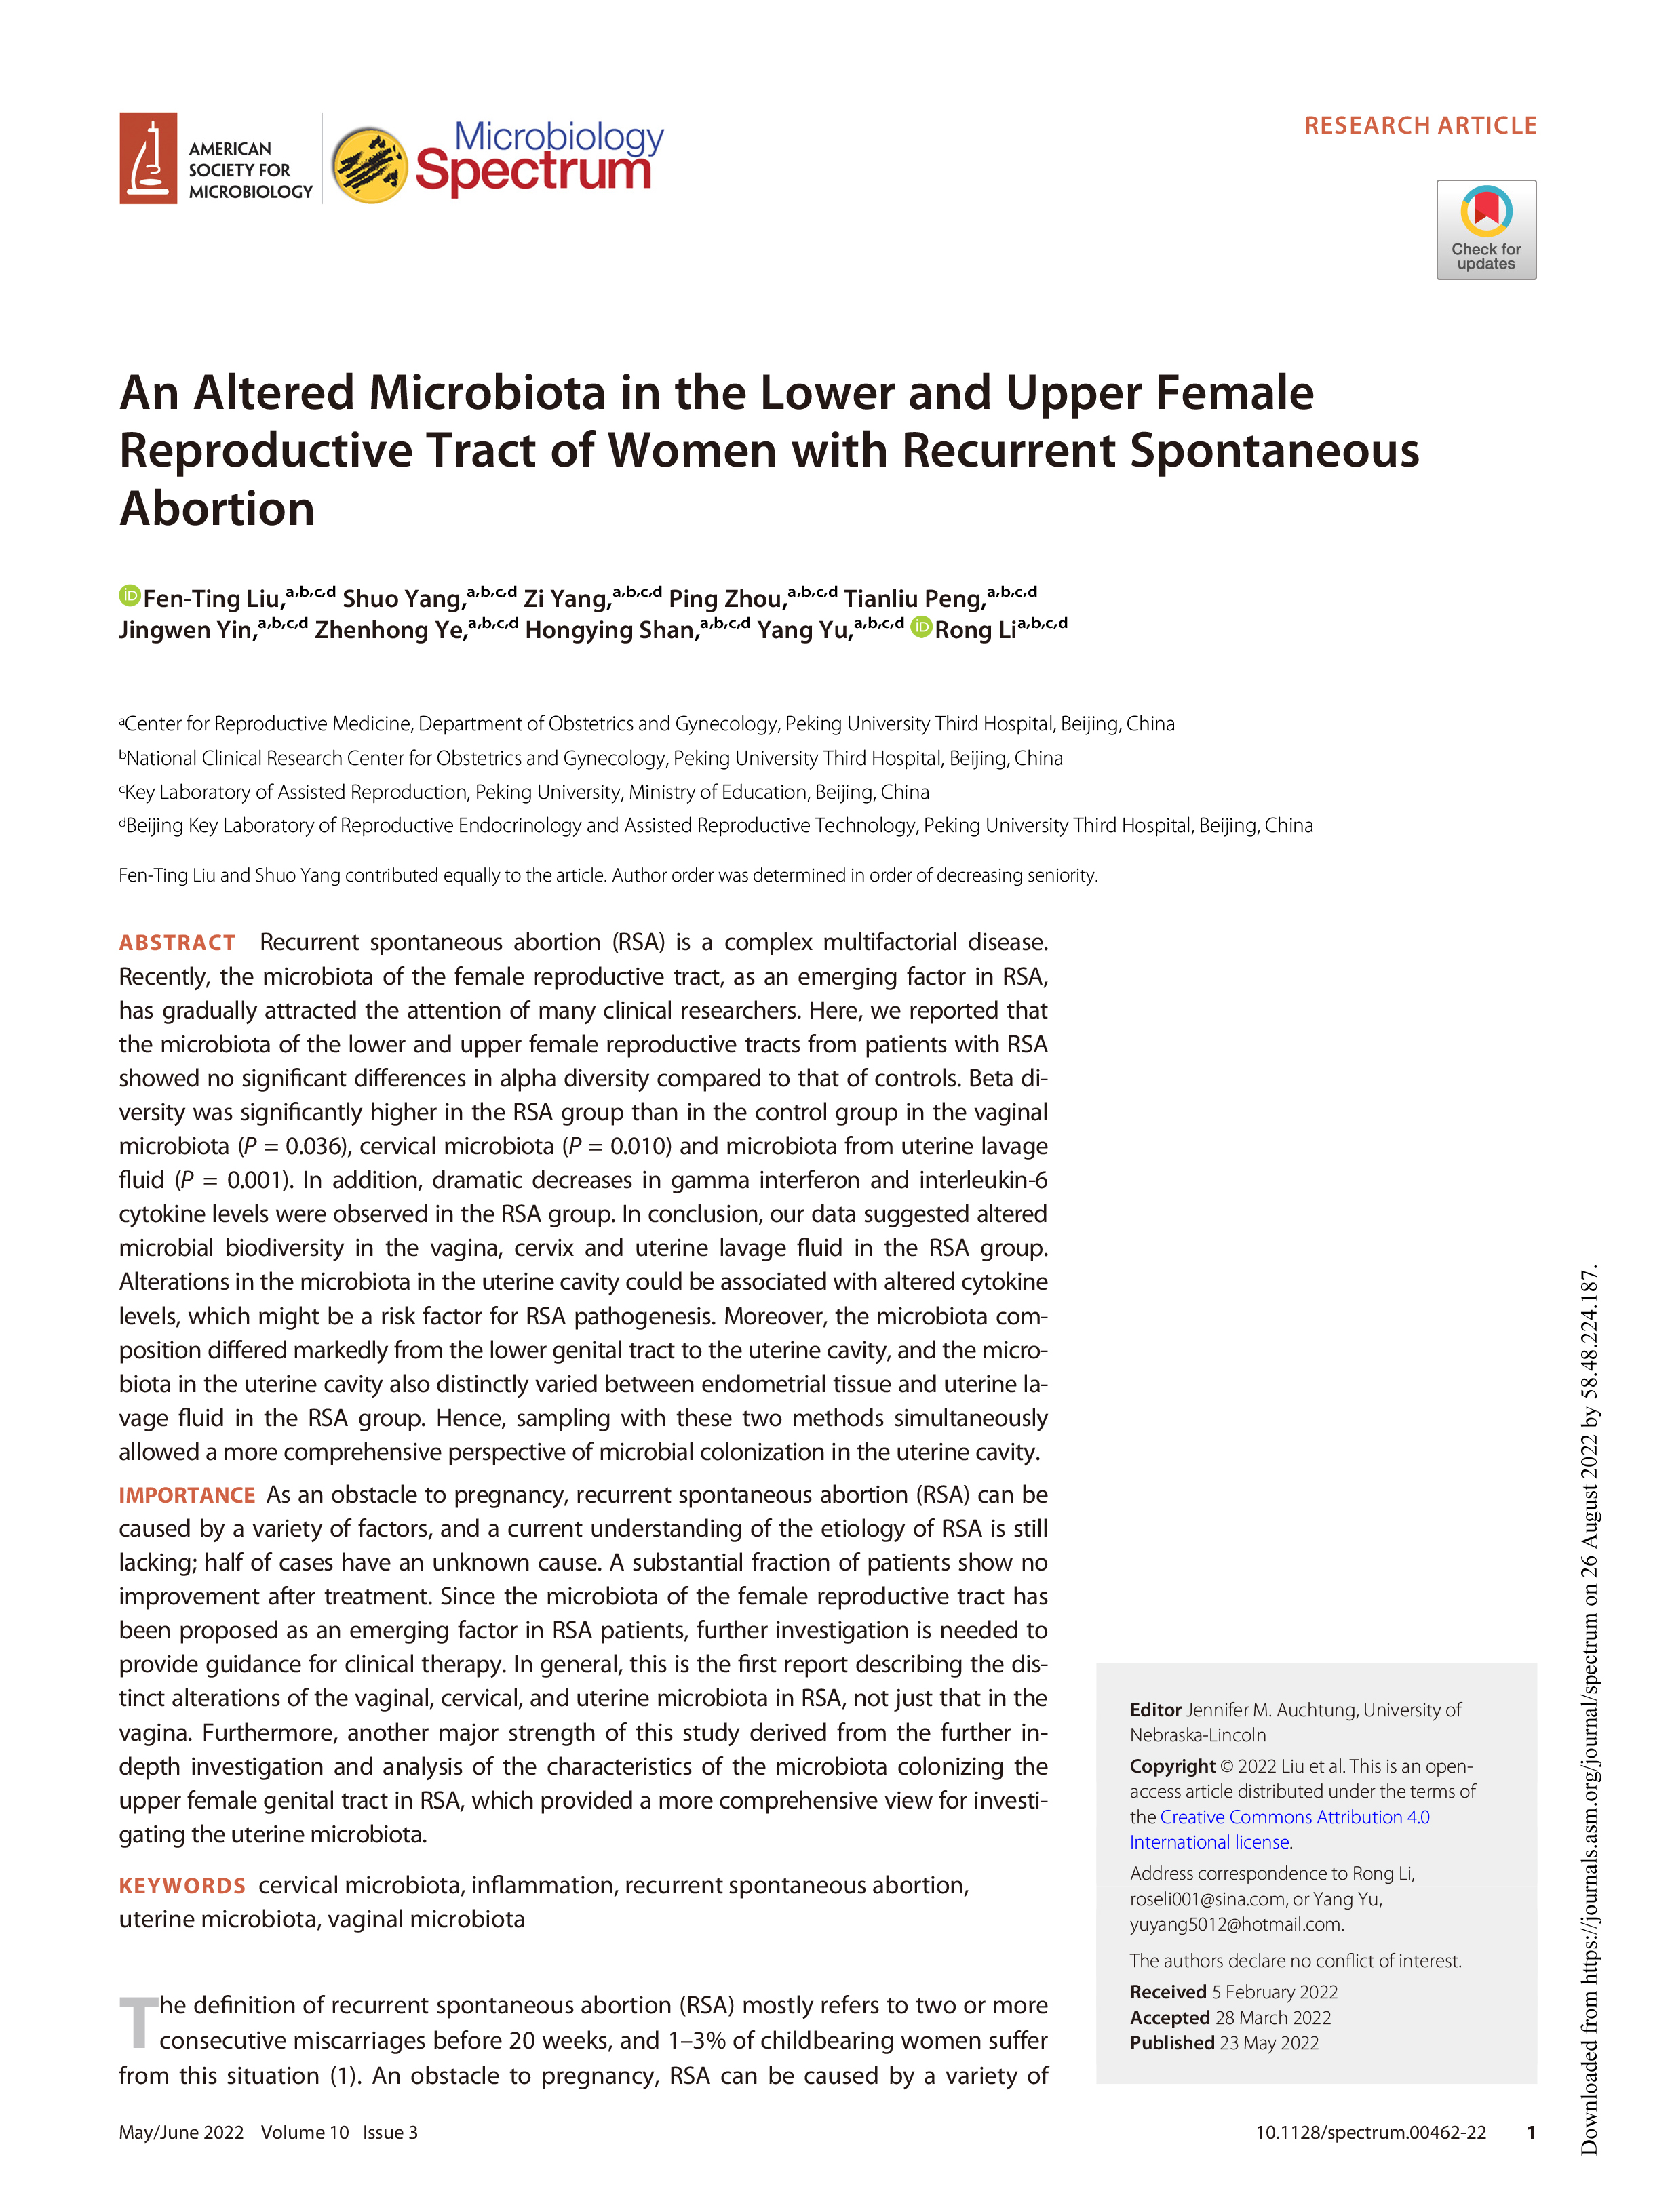 An Altered Microbiota in the Lower and Upper Female Reproductive Tract of Women with Recurrent Spont